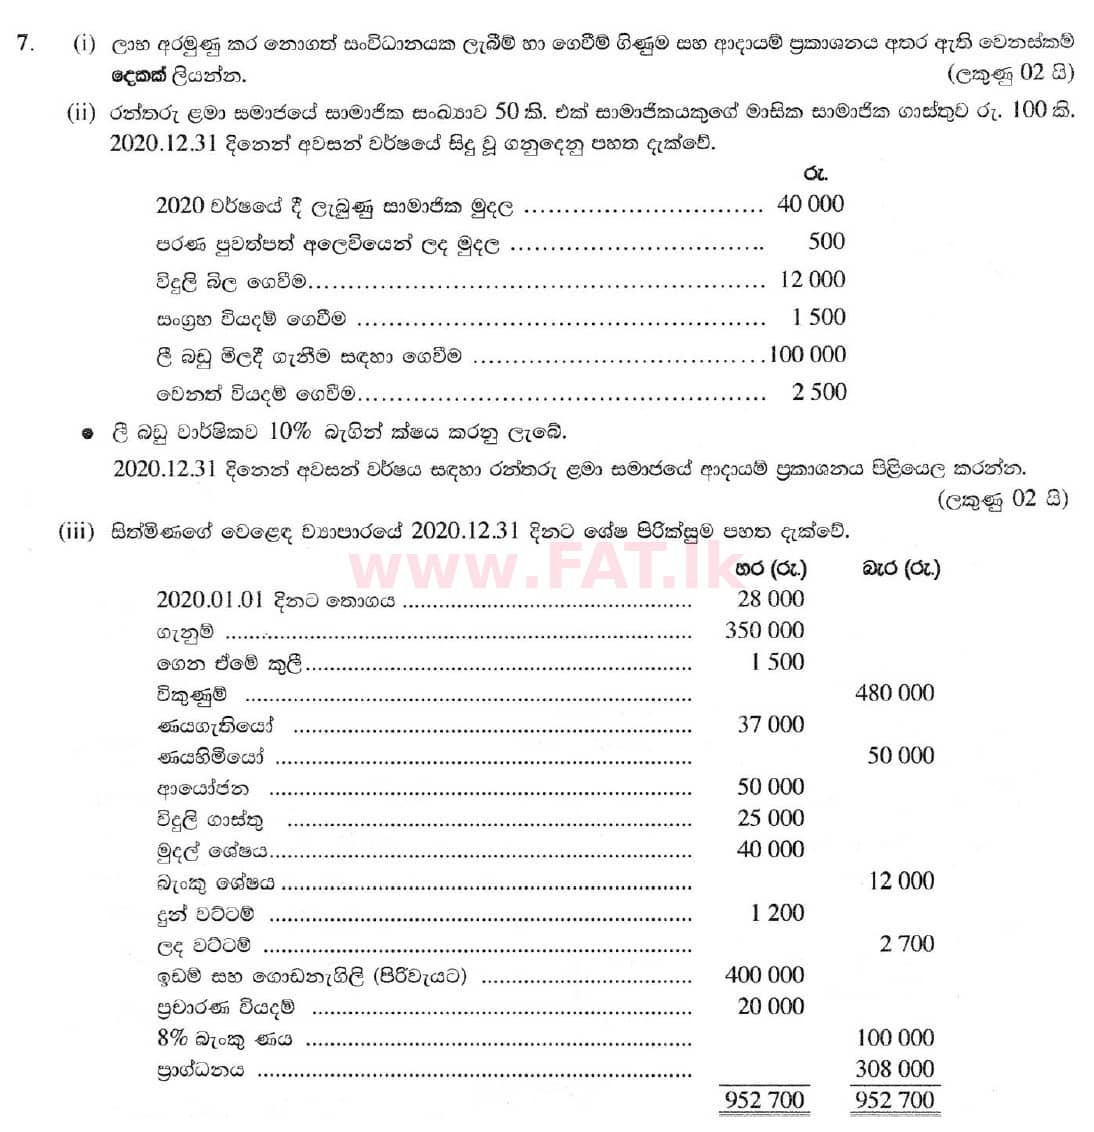 National Syllabus : Ordinary Level (O/L) Business and Accounting Studies - 2020 March - Paper II (සිංහල Medium) 7 1